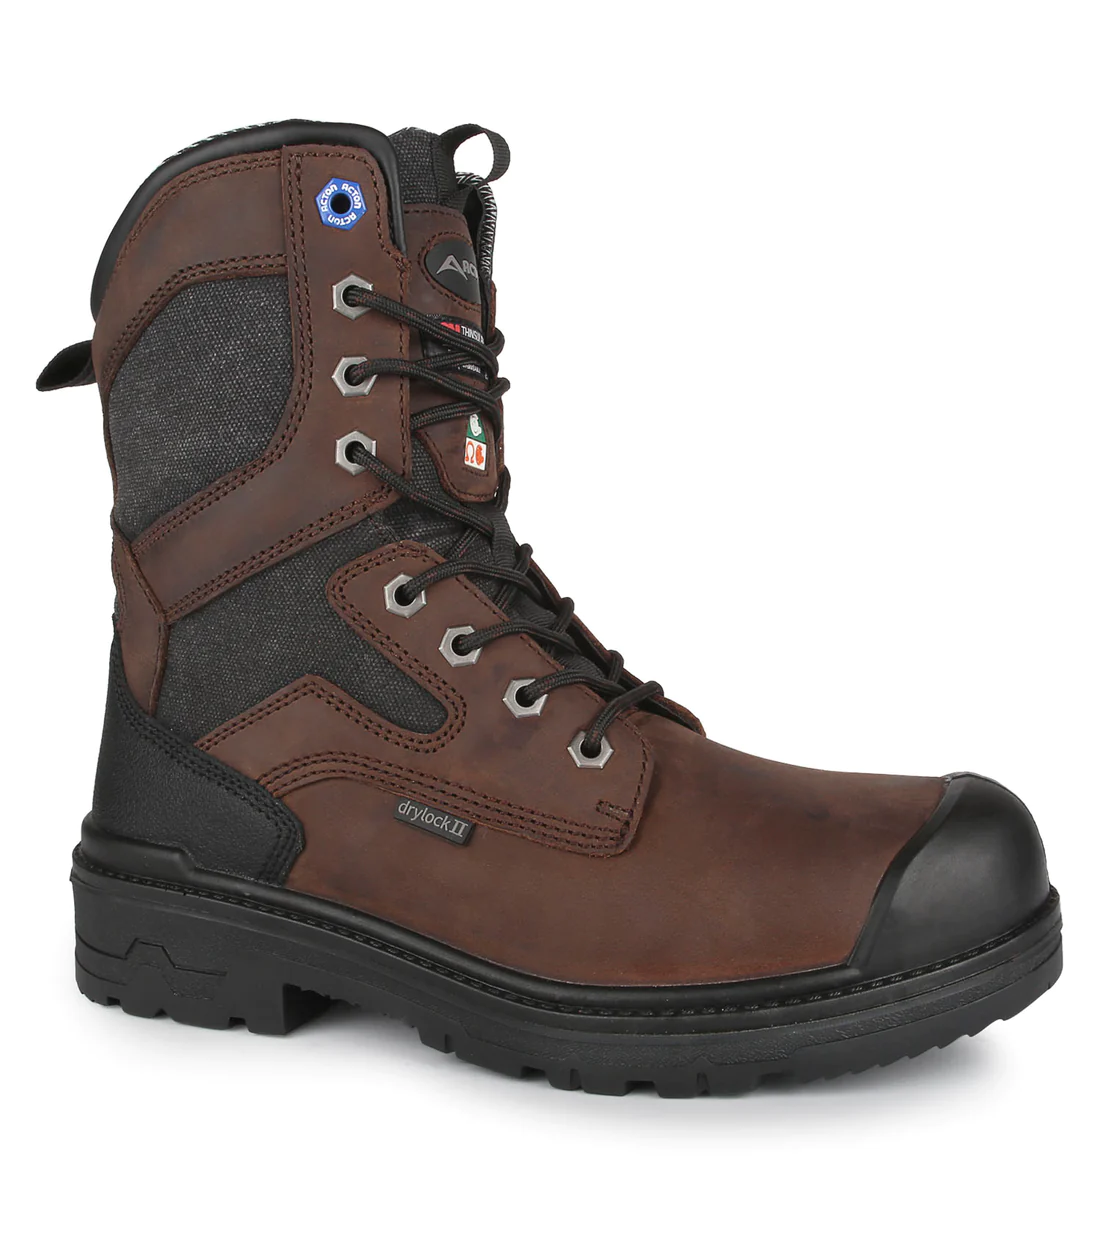 Acton – Boots – #9074-12